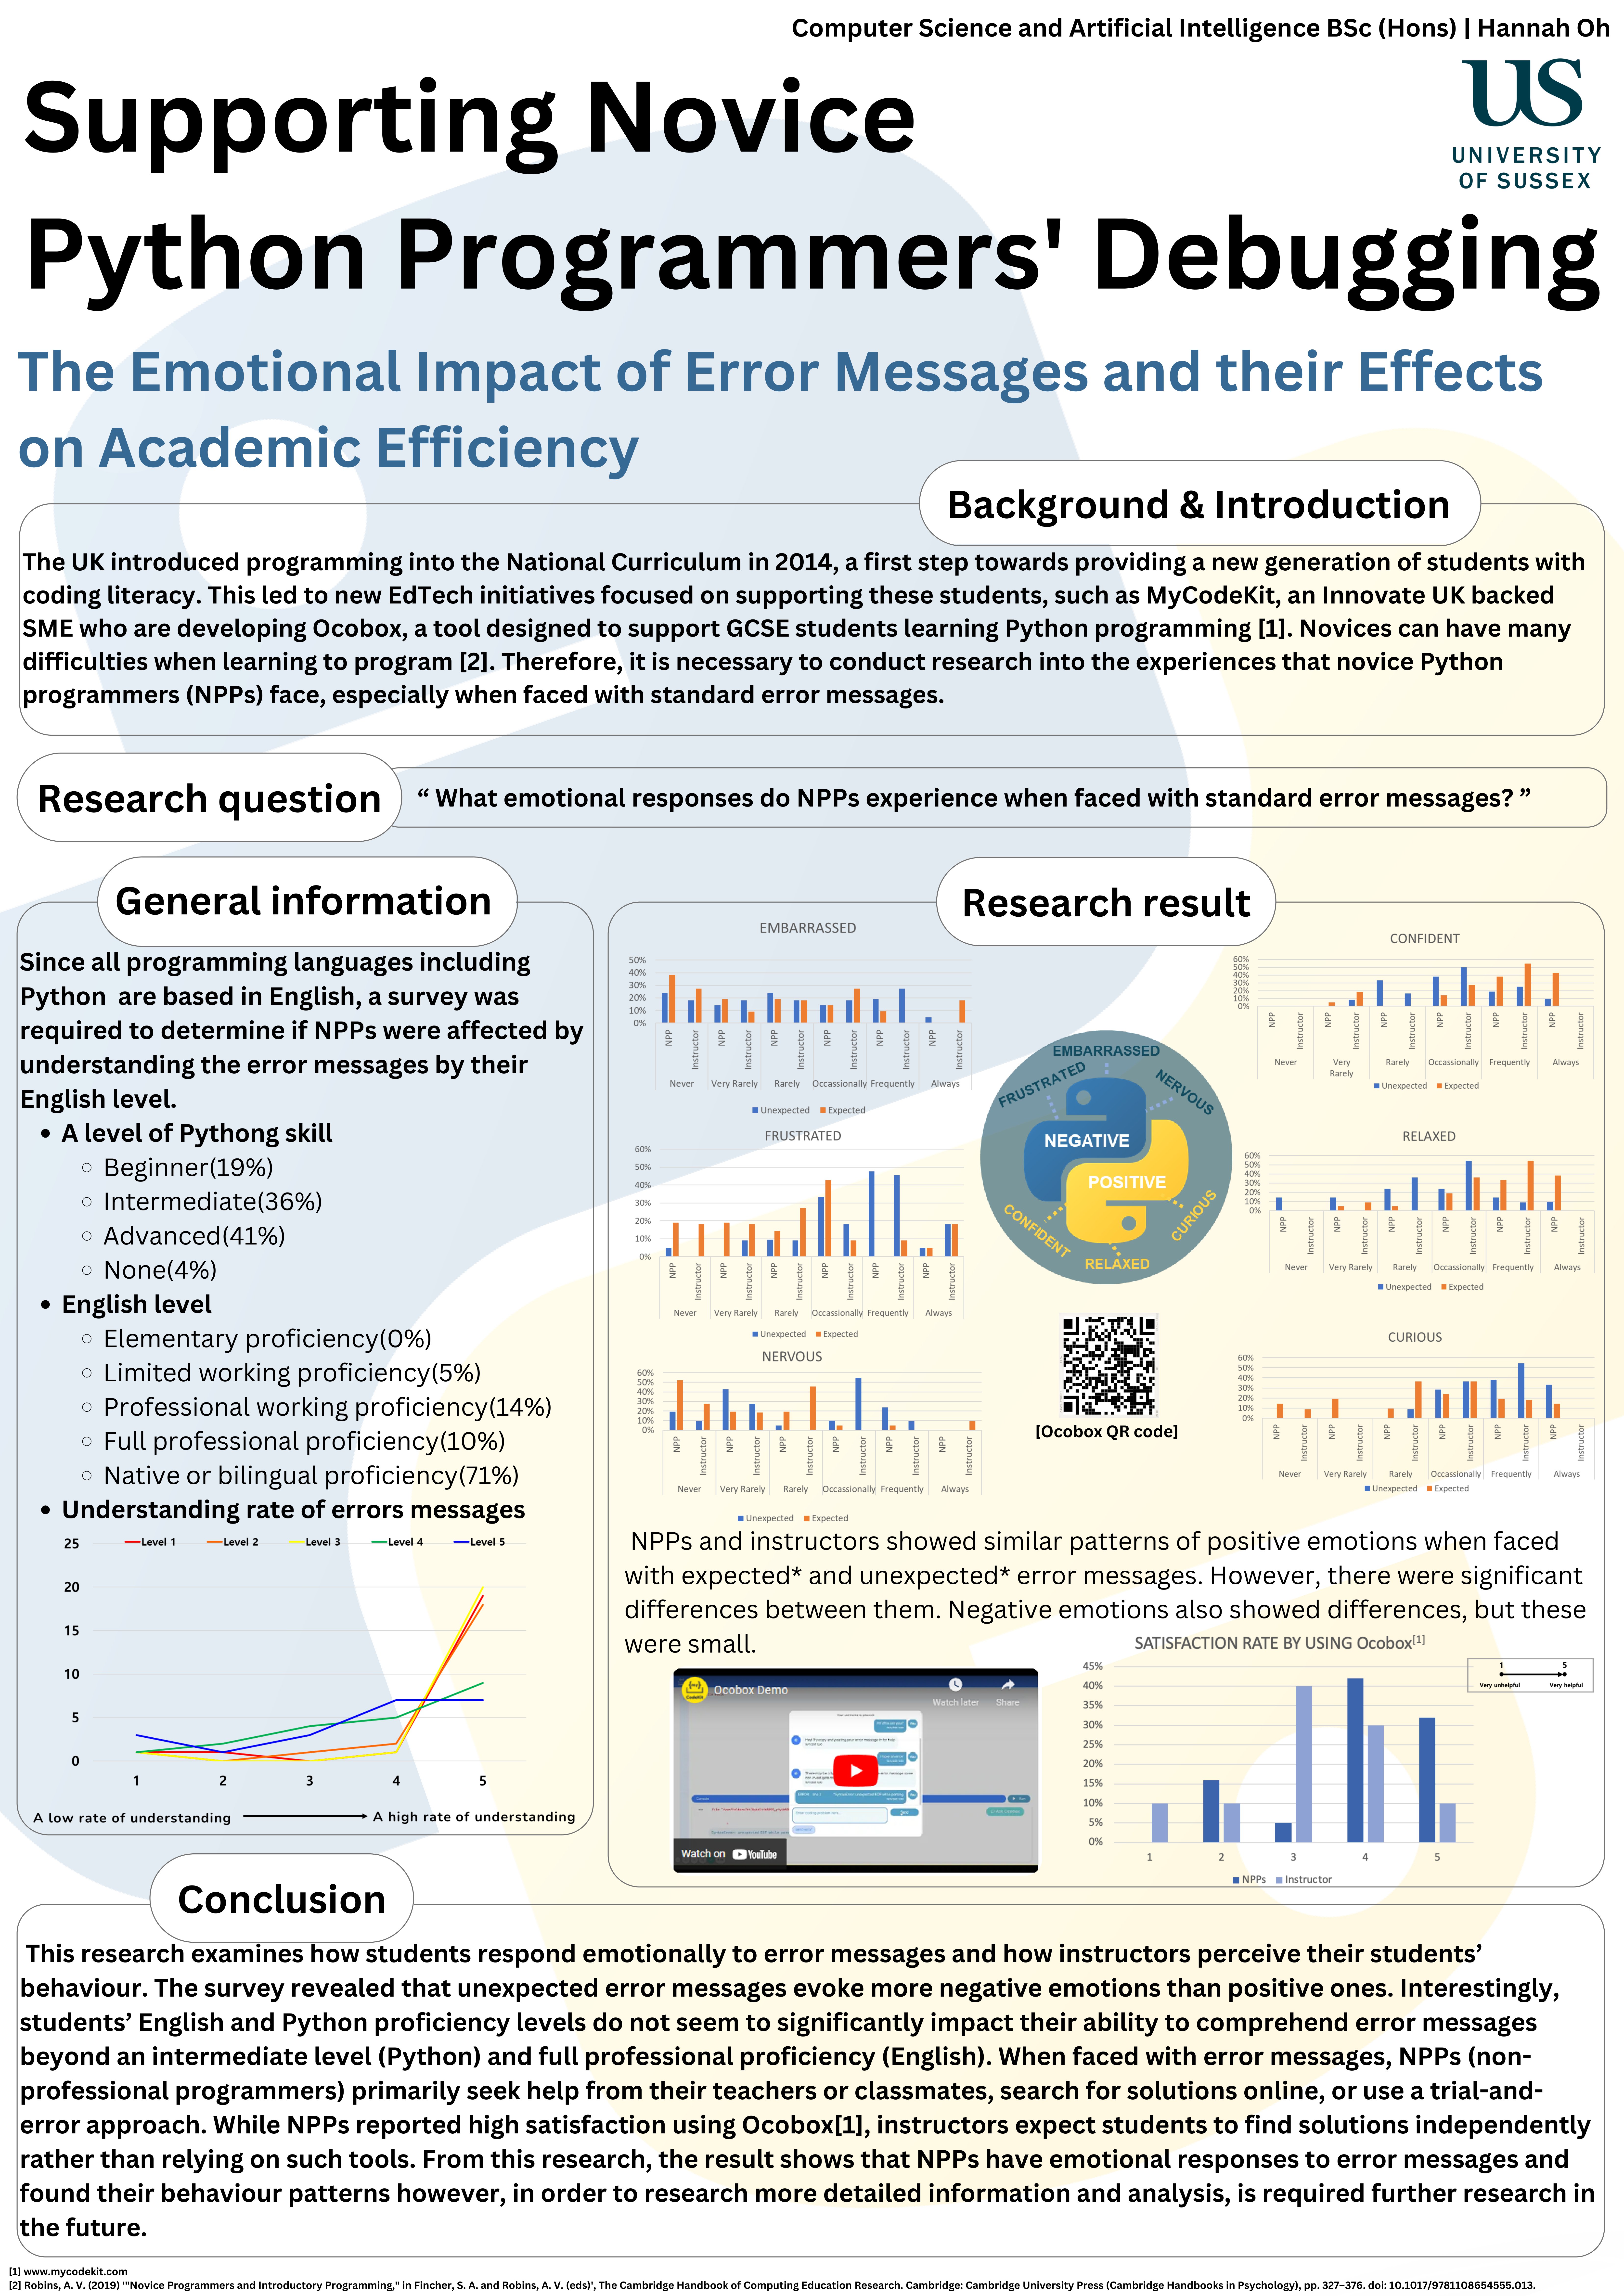 "This research project aims to investigate the emotional responses and problem-solving strategies of novice Python programmers (NPPs) when encountering standard error messages. By working with MyCodeKit, the research presents insights into how Ocobox, a chatbot-based tool, can deliver error messages in a way that promotes resilience and problem-solving skills in NPPs. The primary objectives of the research are to:  • Understand the emotional responses of NPPs when they encounter standard error messages  • Analyse the steps NPPs take to fix errors based on standard error messages to identify the optimal approach for supporting NPPs in recovering from errors.  The results of the research indicate that NPPs experience more negative than positive emotions when encountering unexpected error messages. English level and Python skill level do not seem to affect understanding of the error messages above a certain level such as intermediate (Python skill level) and full professional proficiency (English level). NPPs mostly rely on seeking help from teachers/classmates, searching online, and trial-and-error to resolve errors. NPPs were satisfied with using Ocobox, but instructors preferred students to find solutions independently rather than relying on the tool. The research shows that NPPs have emotional responses to error messages and have specific behaviour patterns when facing them, however, more research is needed to understand this topic in more detail."